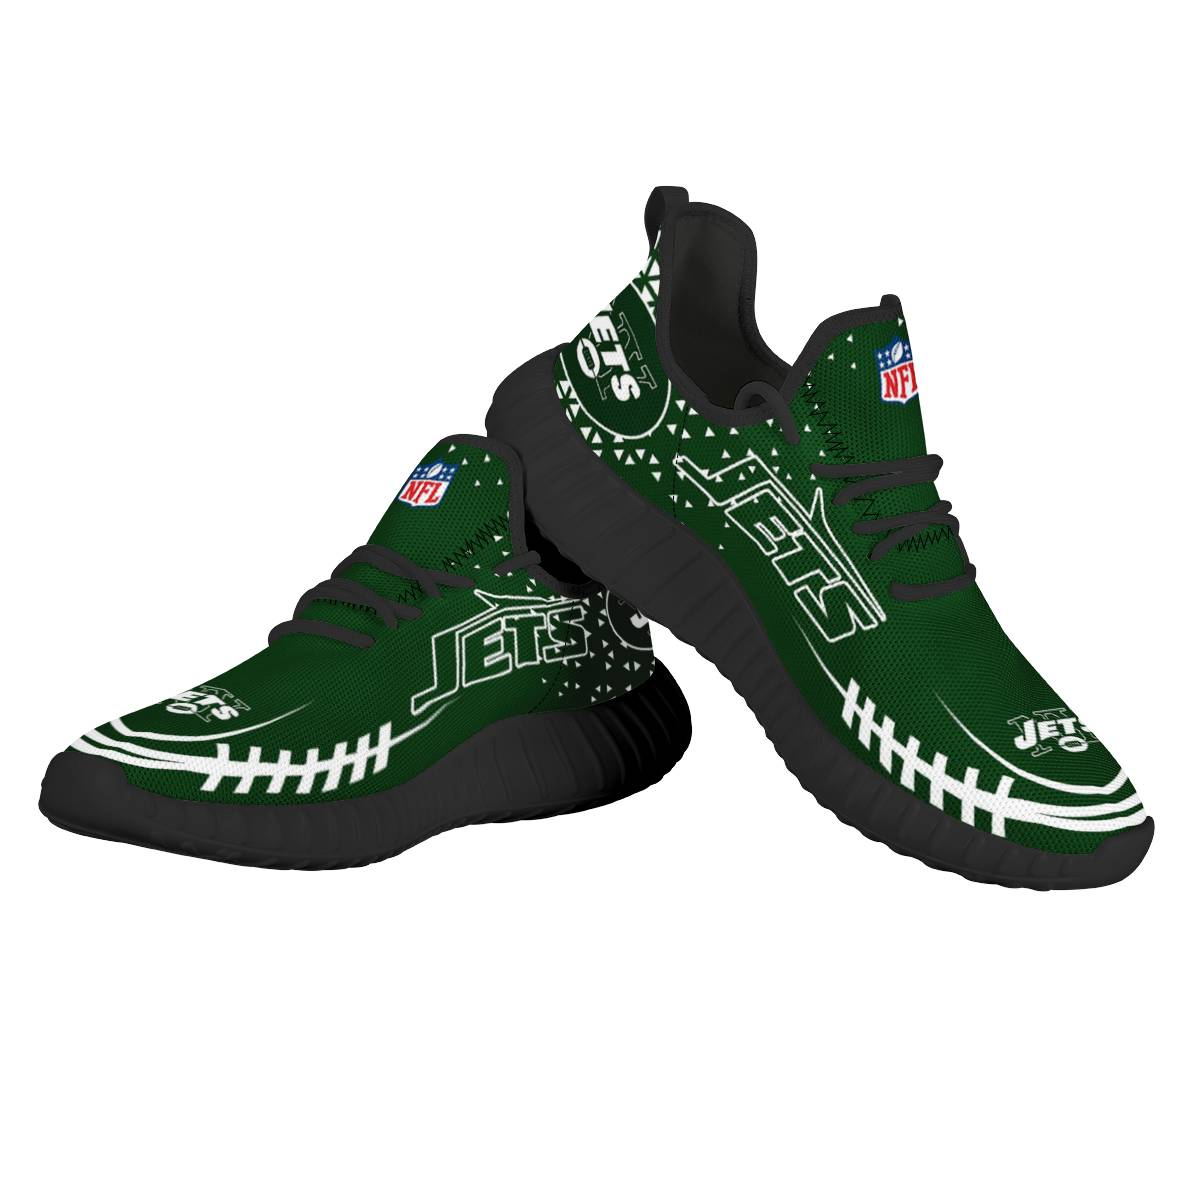 Men's NFL New York Jets Mesh Knit Sneakers/Shoes 003